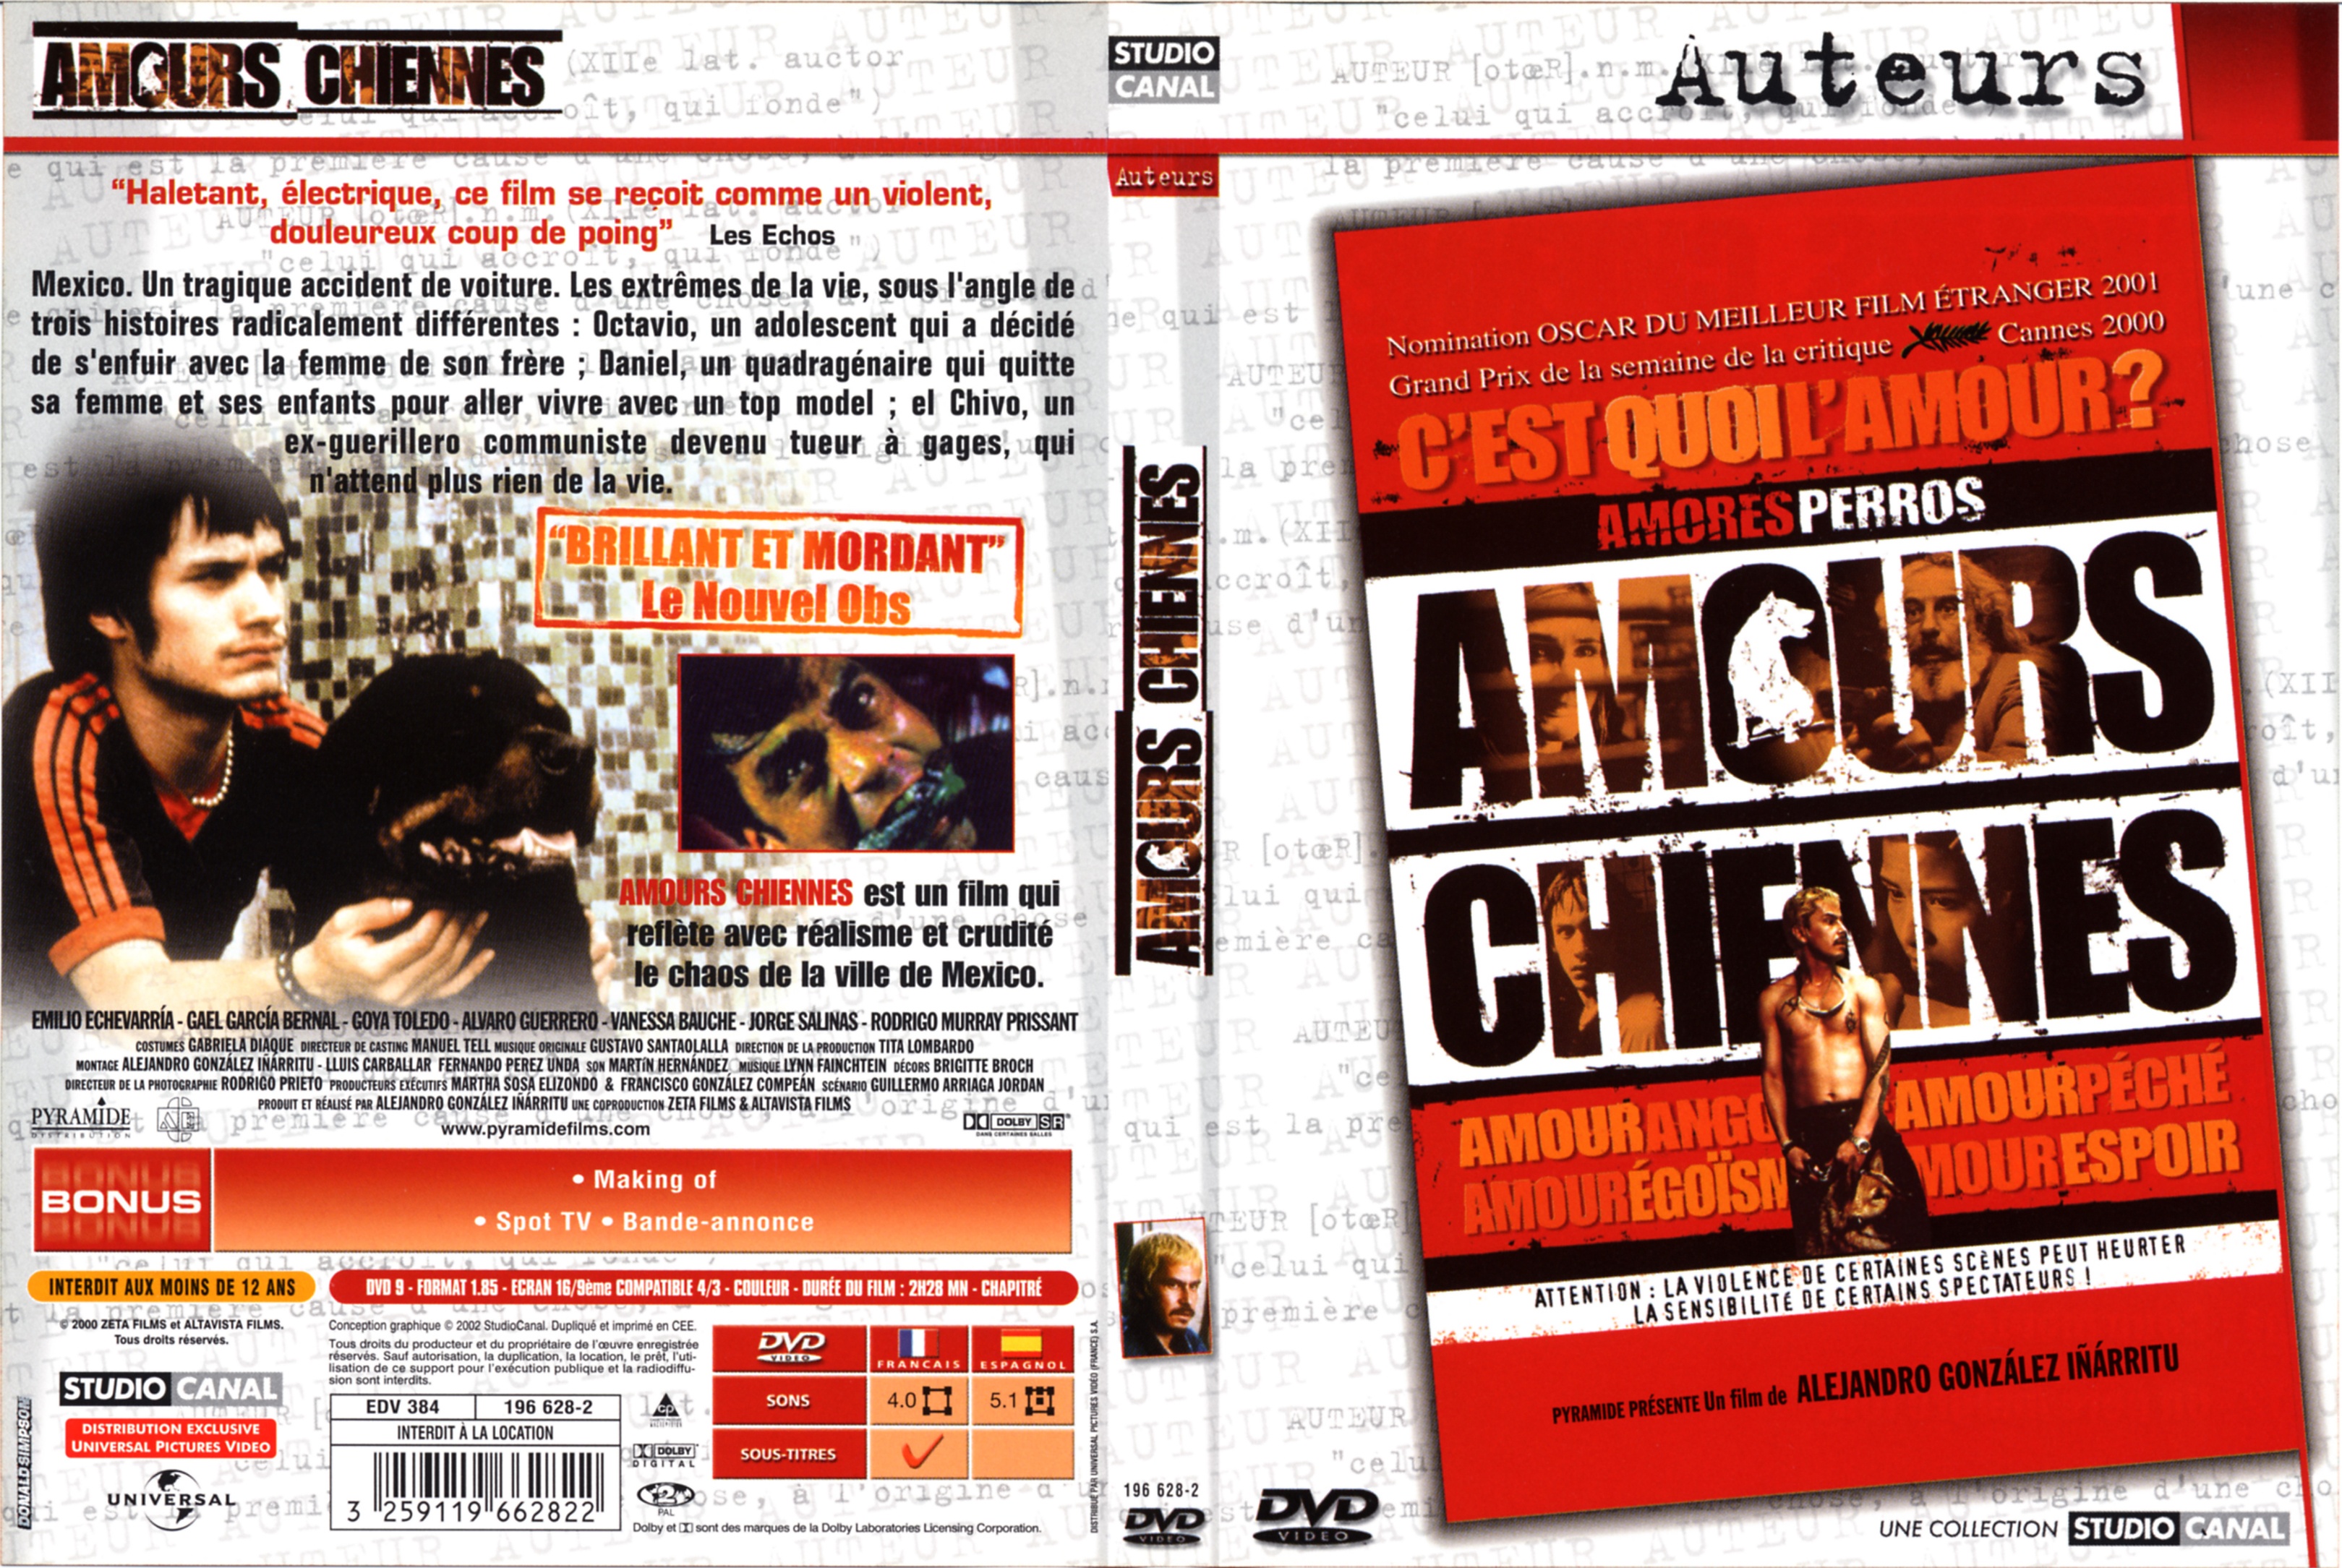 Jaquette DVD Amours chiennes v2